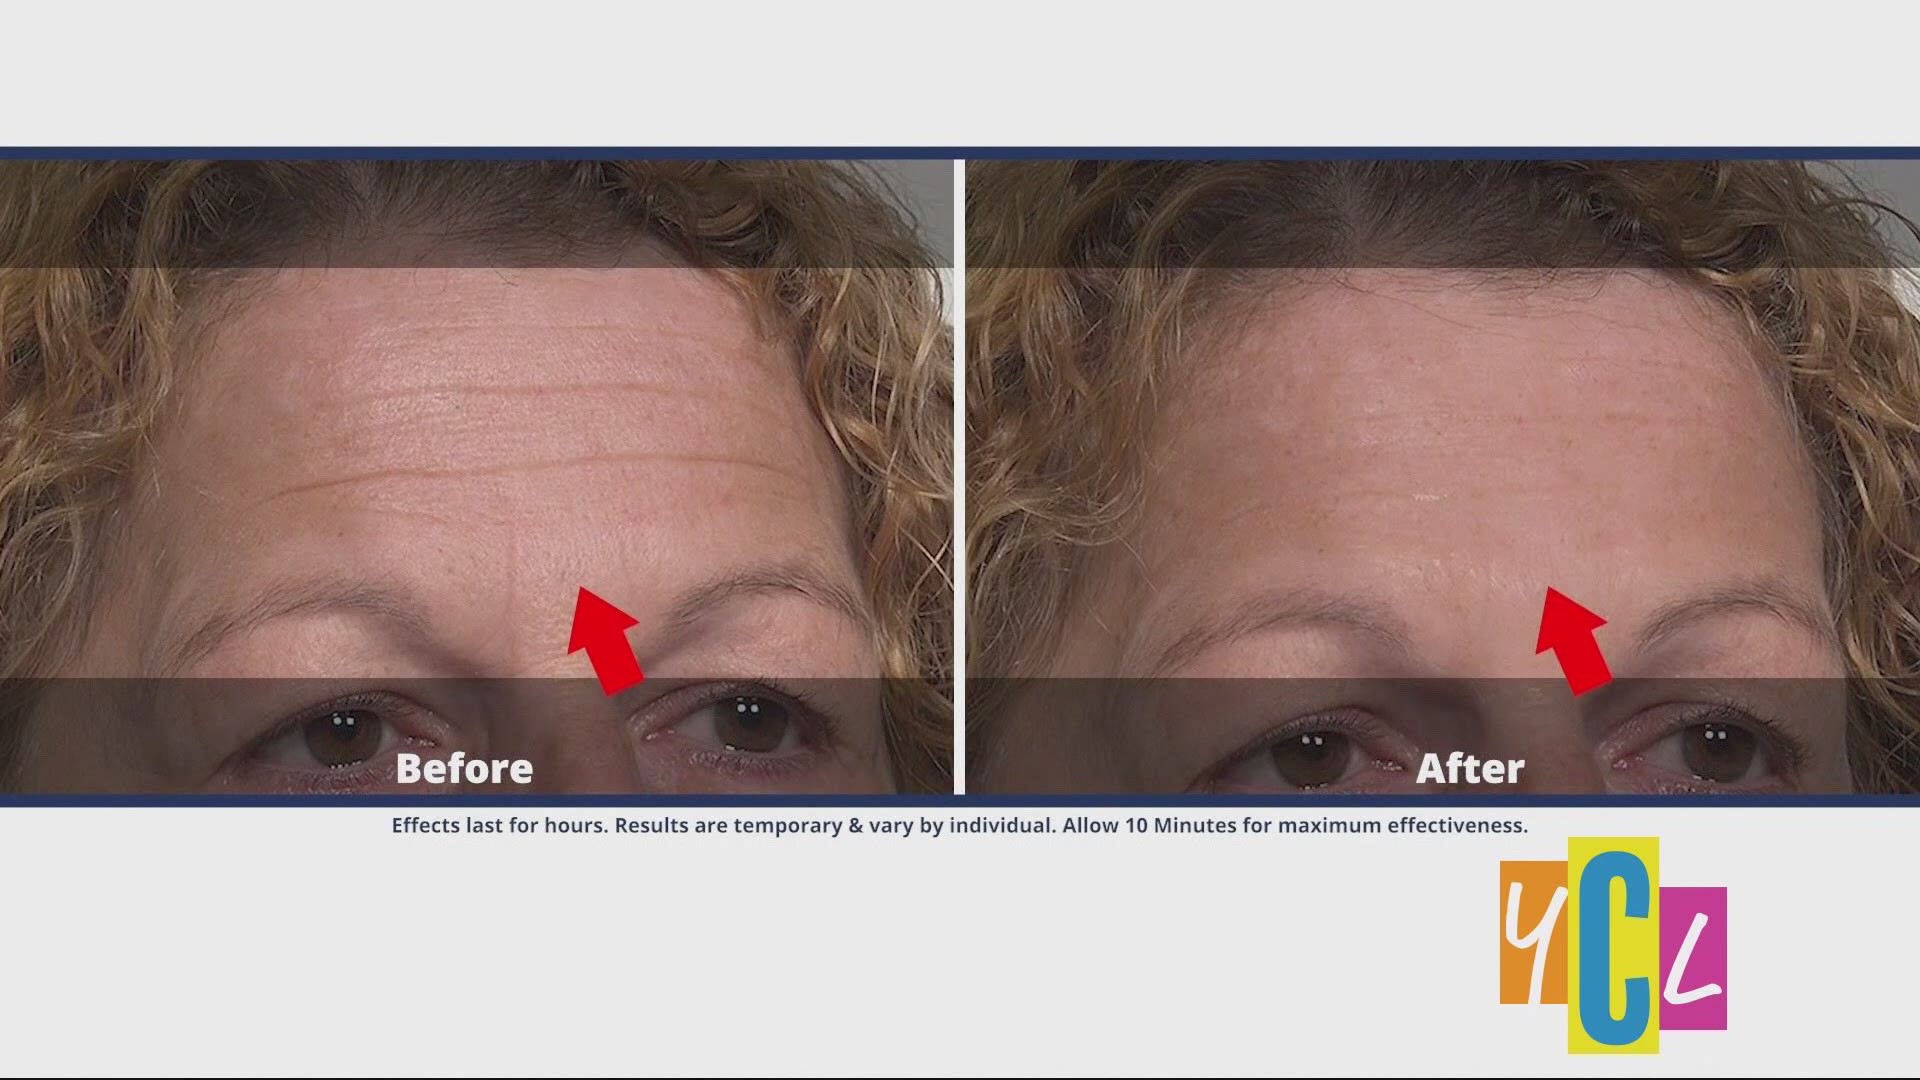 Improve the appearance of fine wrinkles and lines using Plexaderm. This segment was sponsored by True Earth Health Solutions.